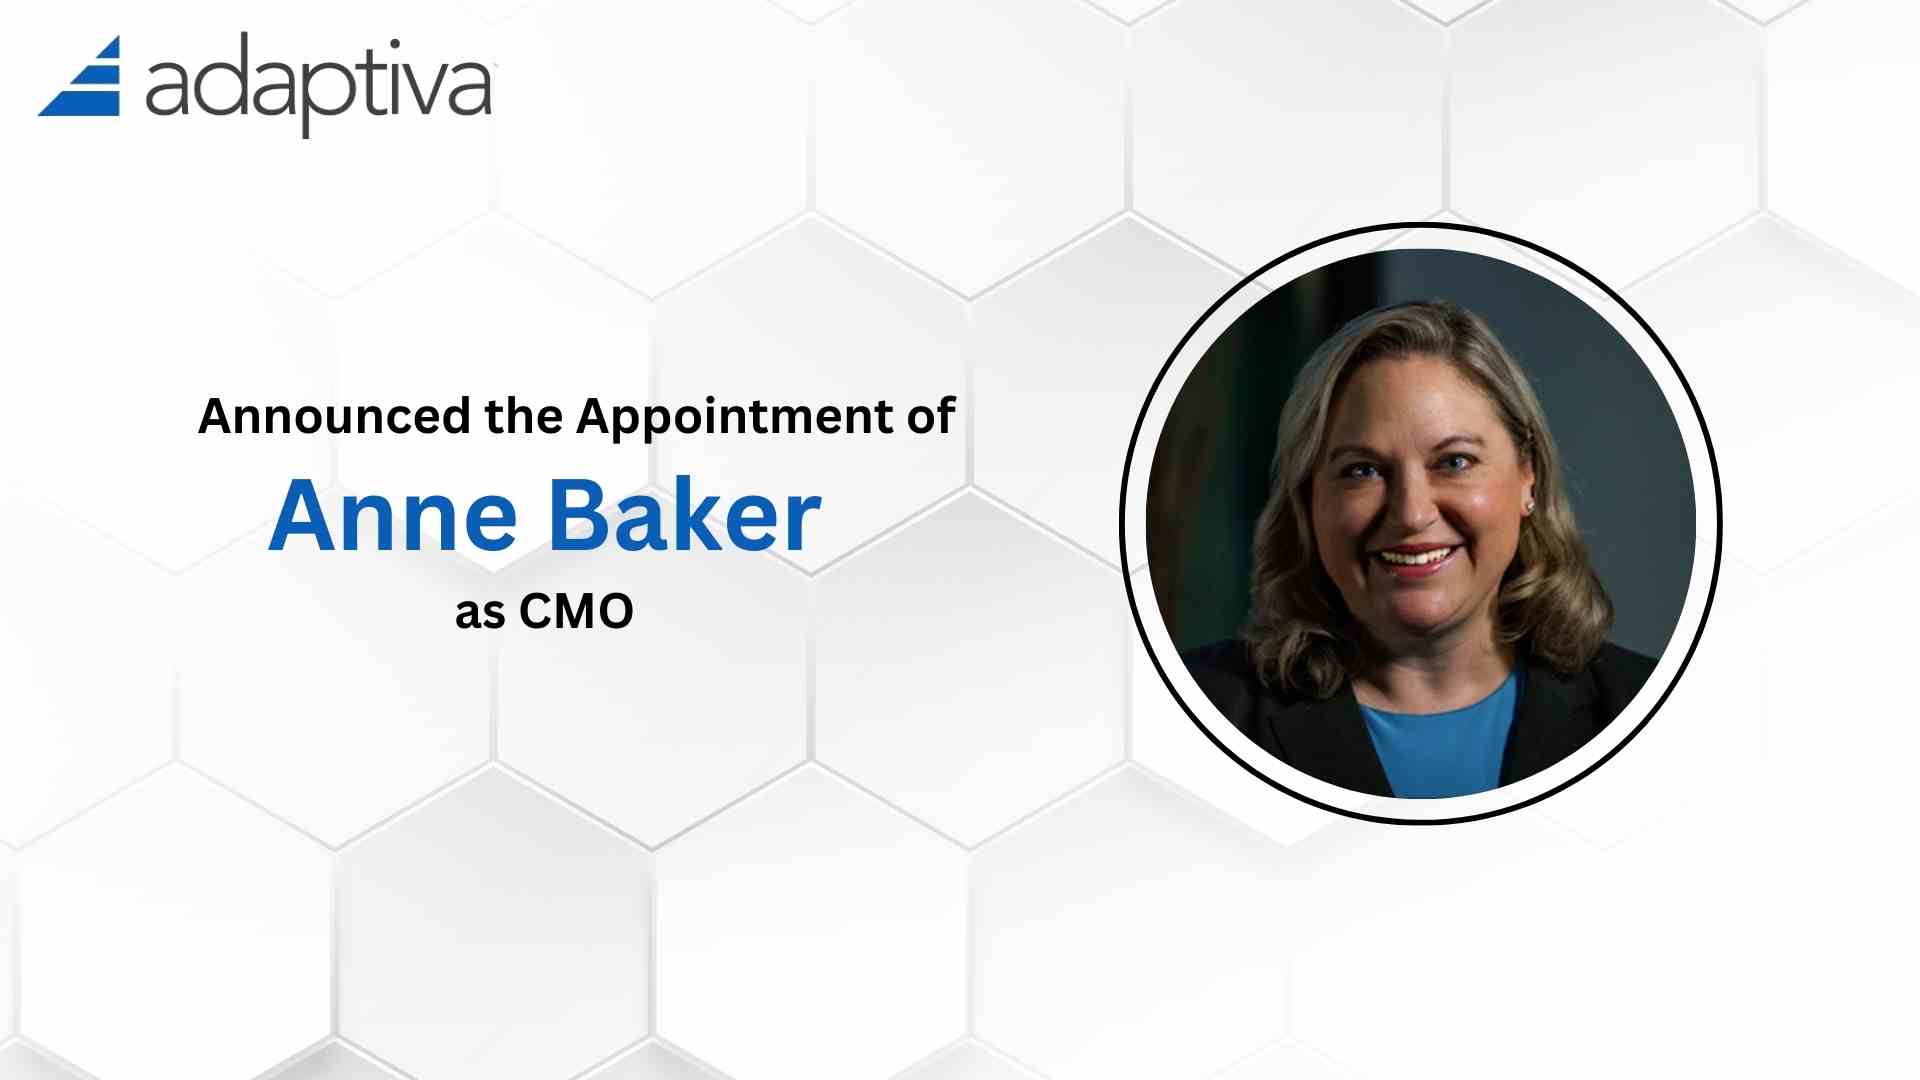 Anne Baker Returns to Adaptiva as CMO to Lead the New Era of Autonomous Endpoint Management